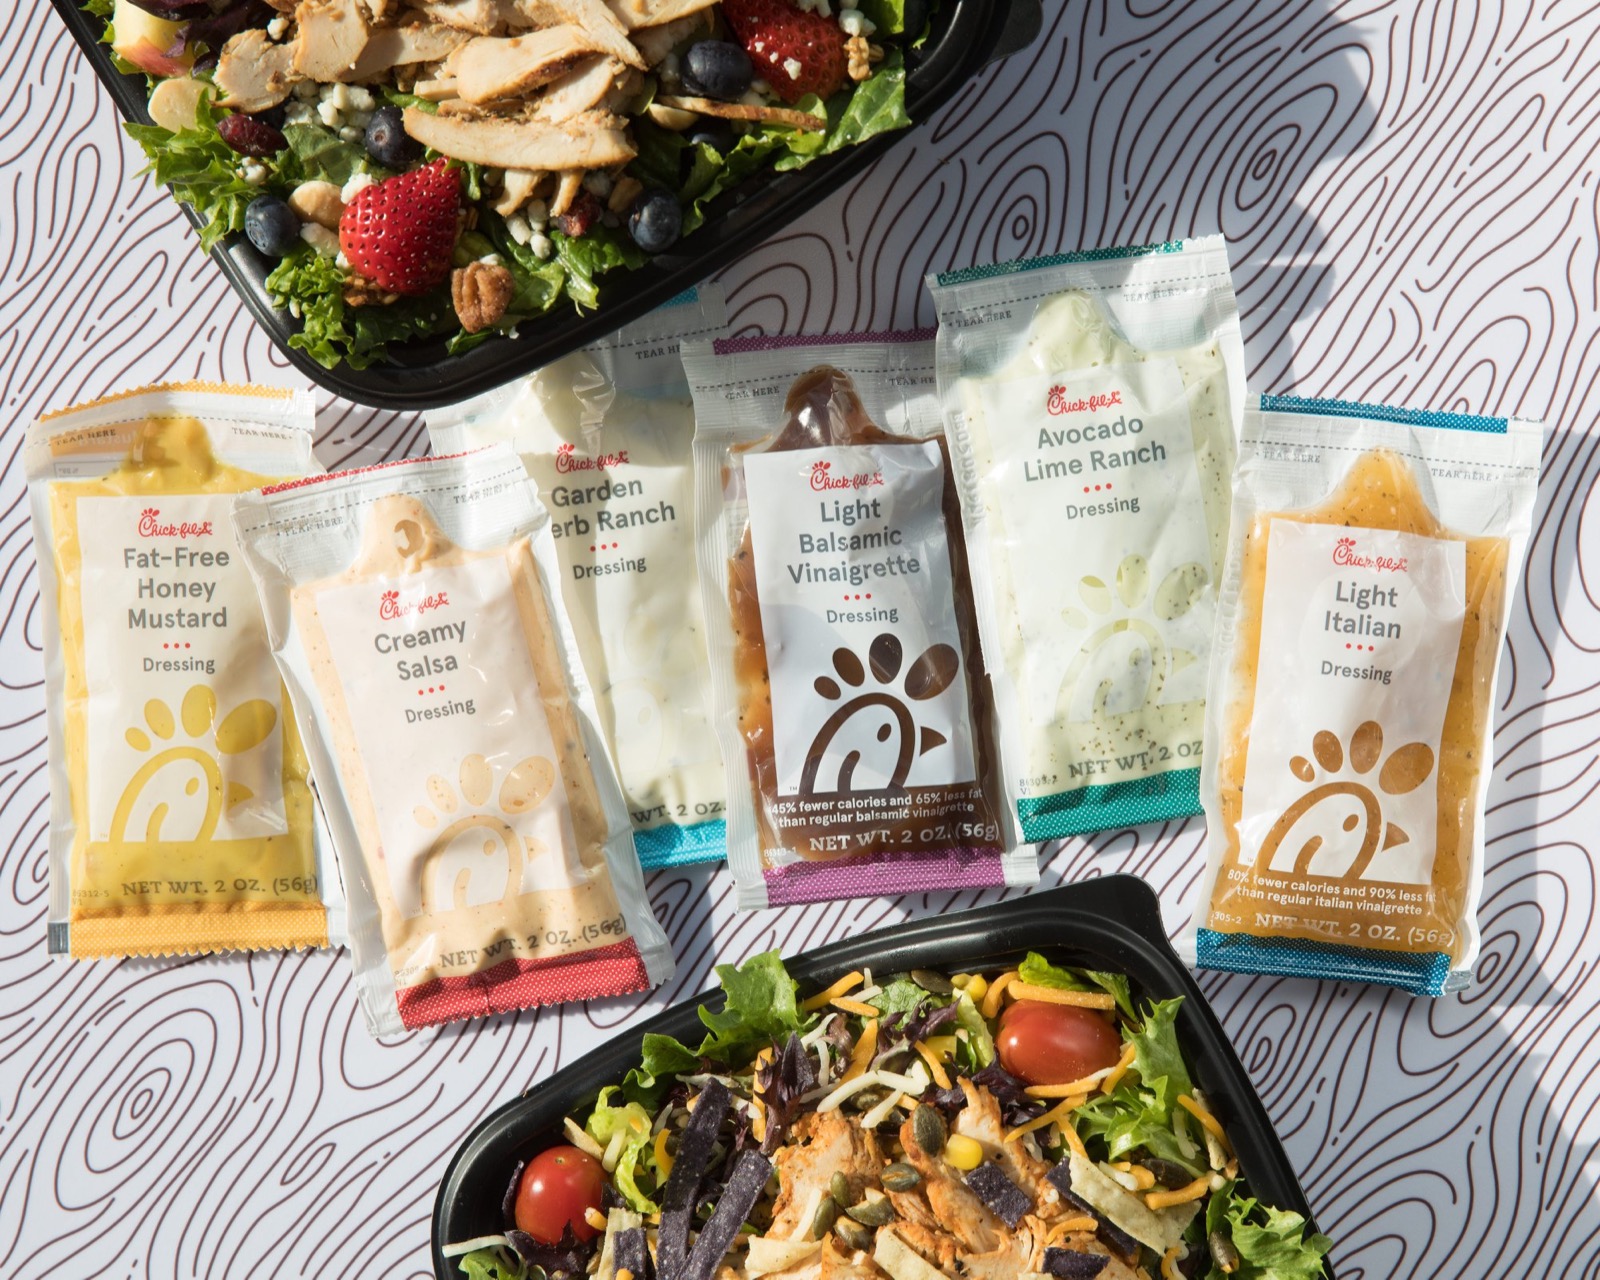 Can I Guess Your Age & Gender by Your Chick-fil-A Order? Quiz Chick-fil-A salad dressings